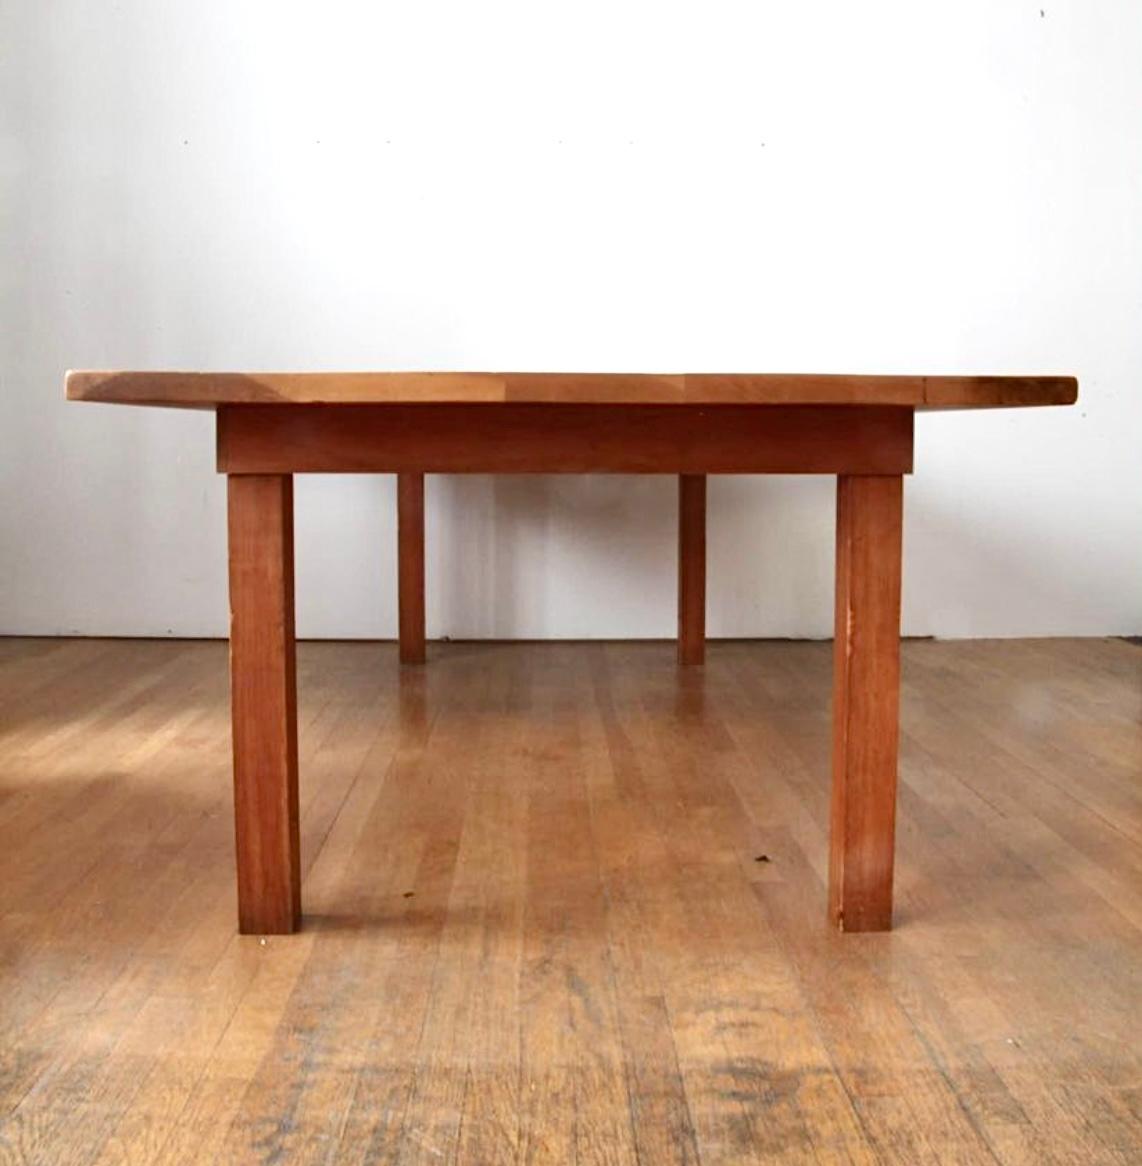 This remarkable table is attributed to James Cooper, a well known carpenter in New York in the 1980s. 

This table is strikingly similar to 